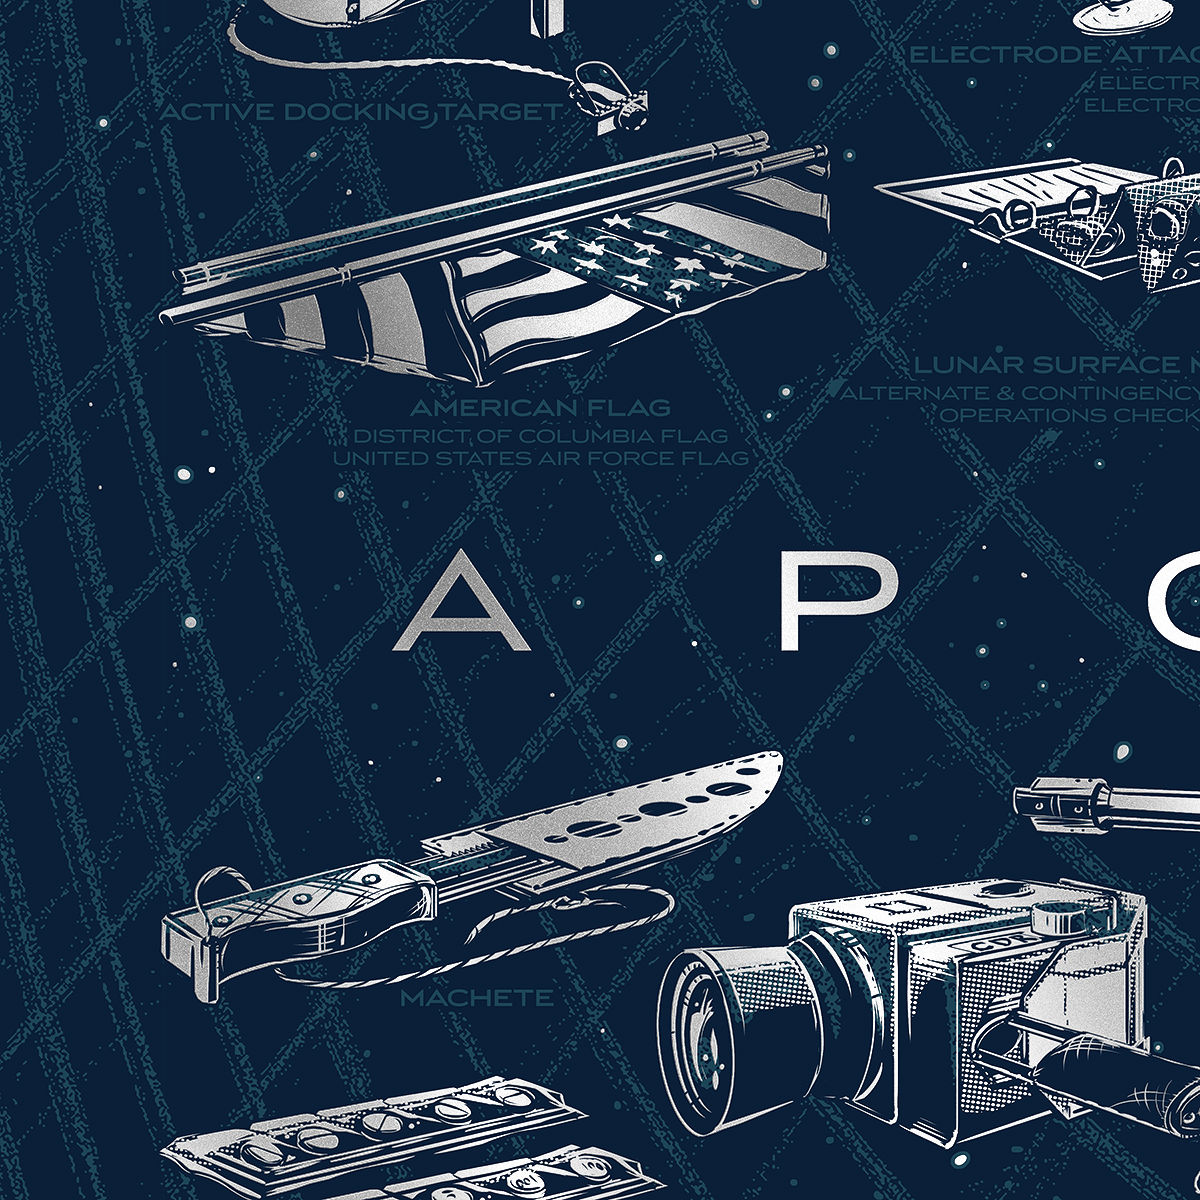 The Detail In This Apollo 11 Poster Is Almost As Amazing As The Trip Itself